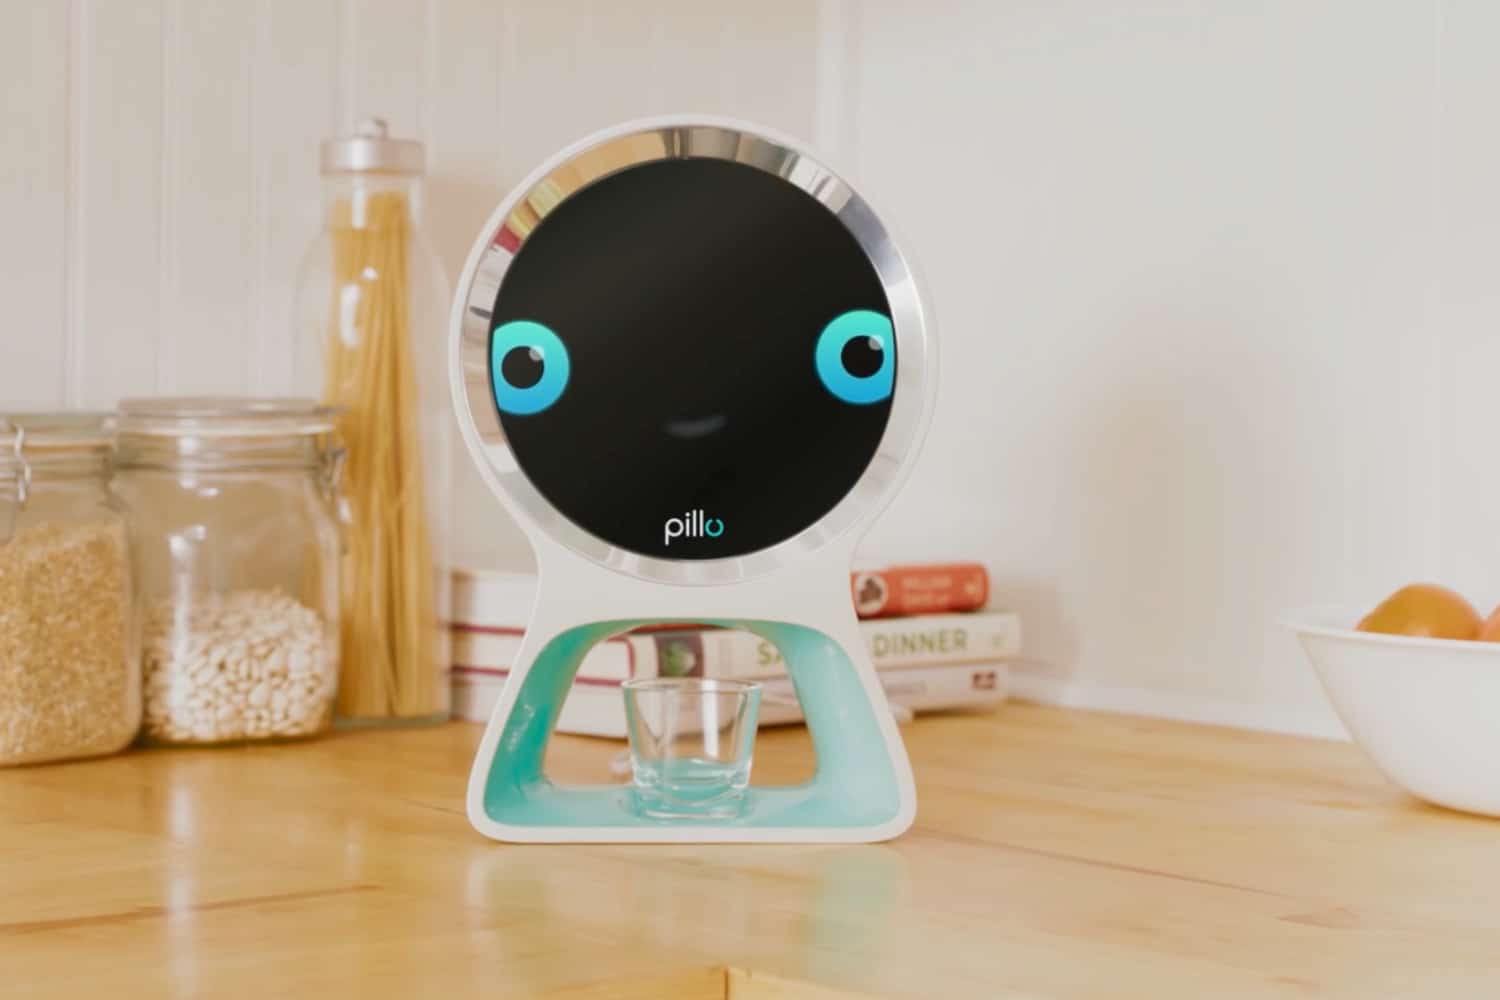 Introducing Pillo: Your Very Own Personal Home Health Robot